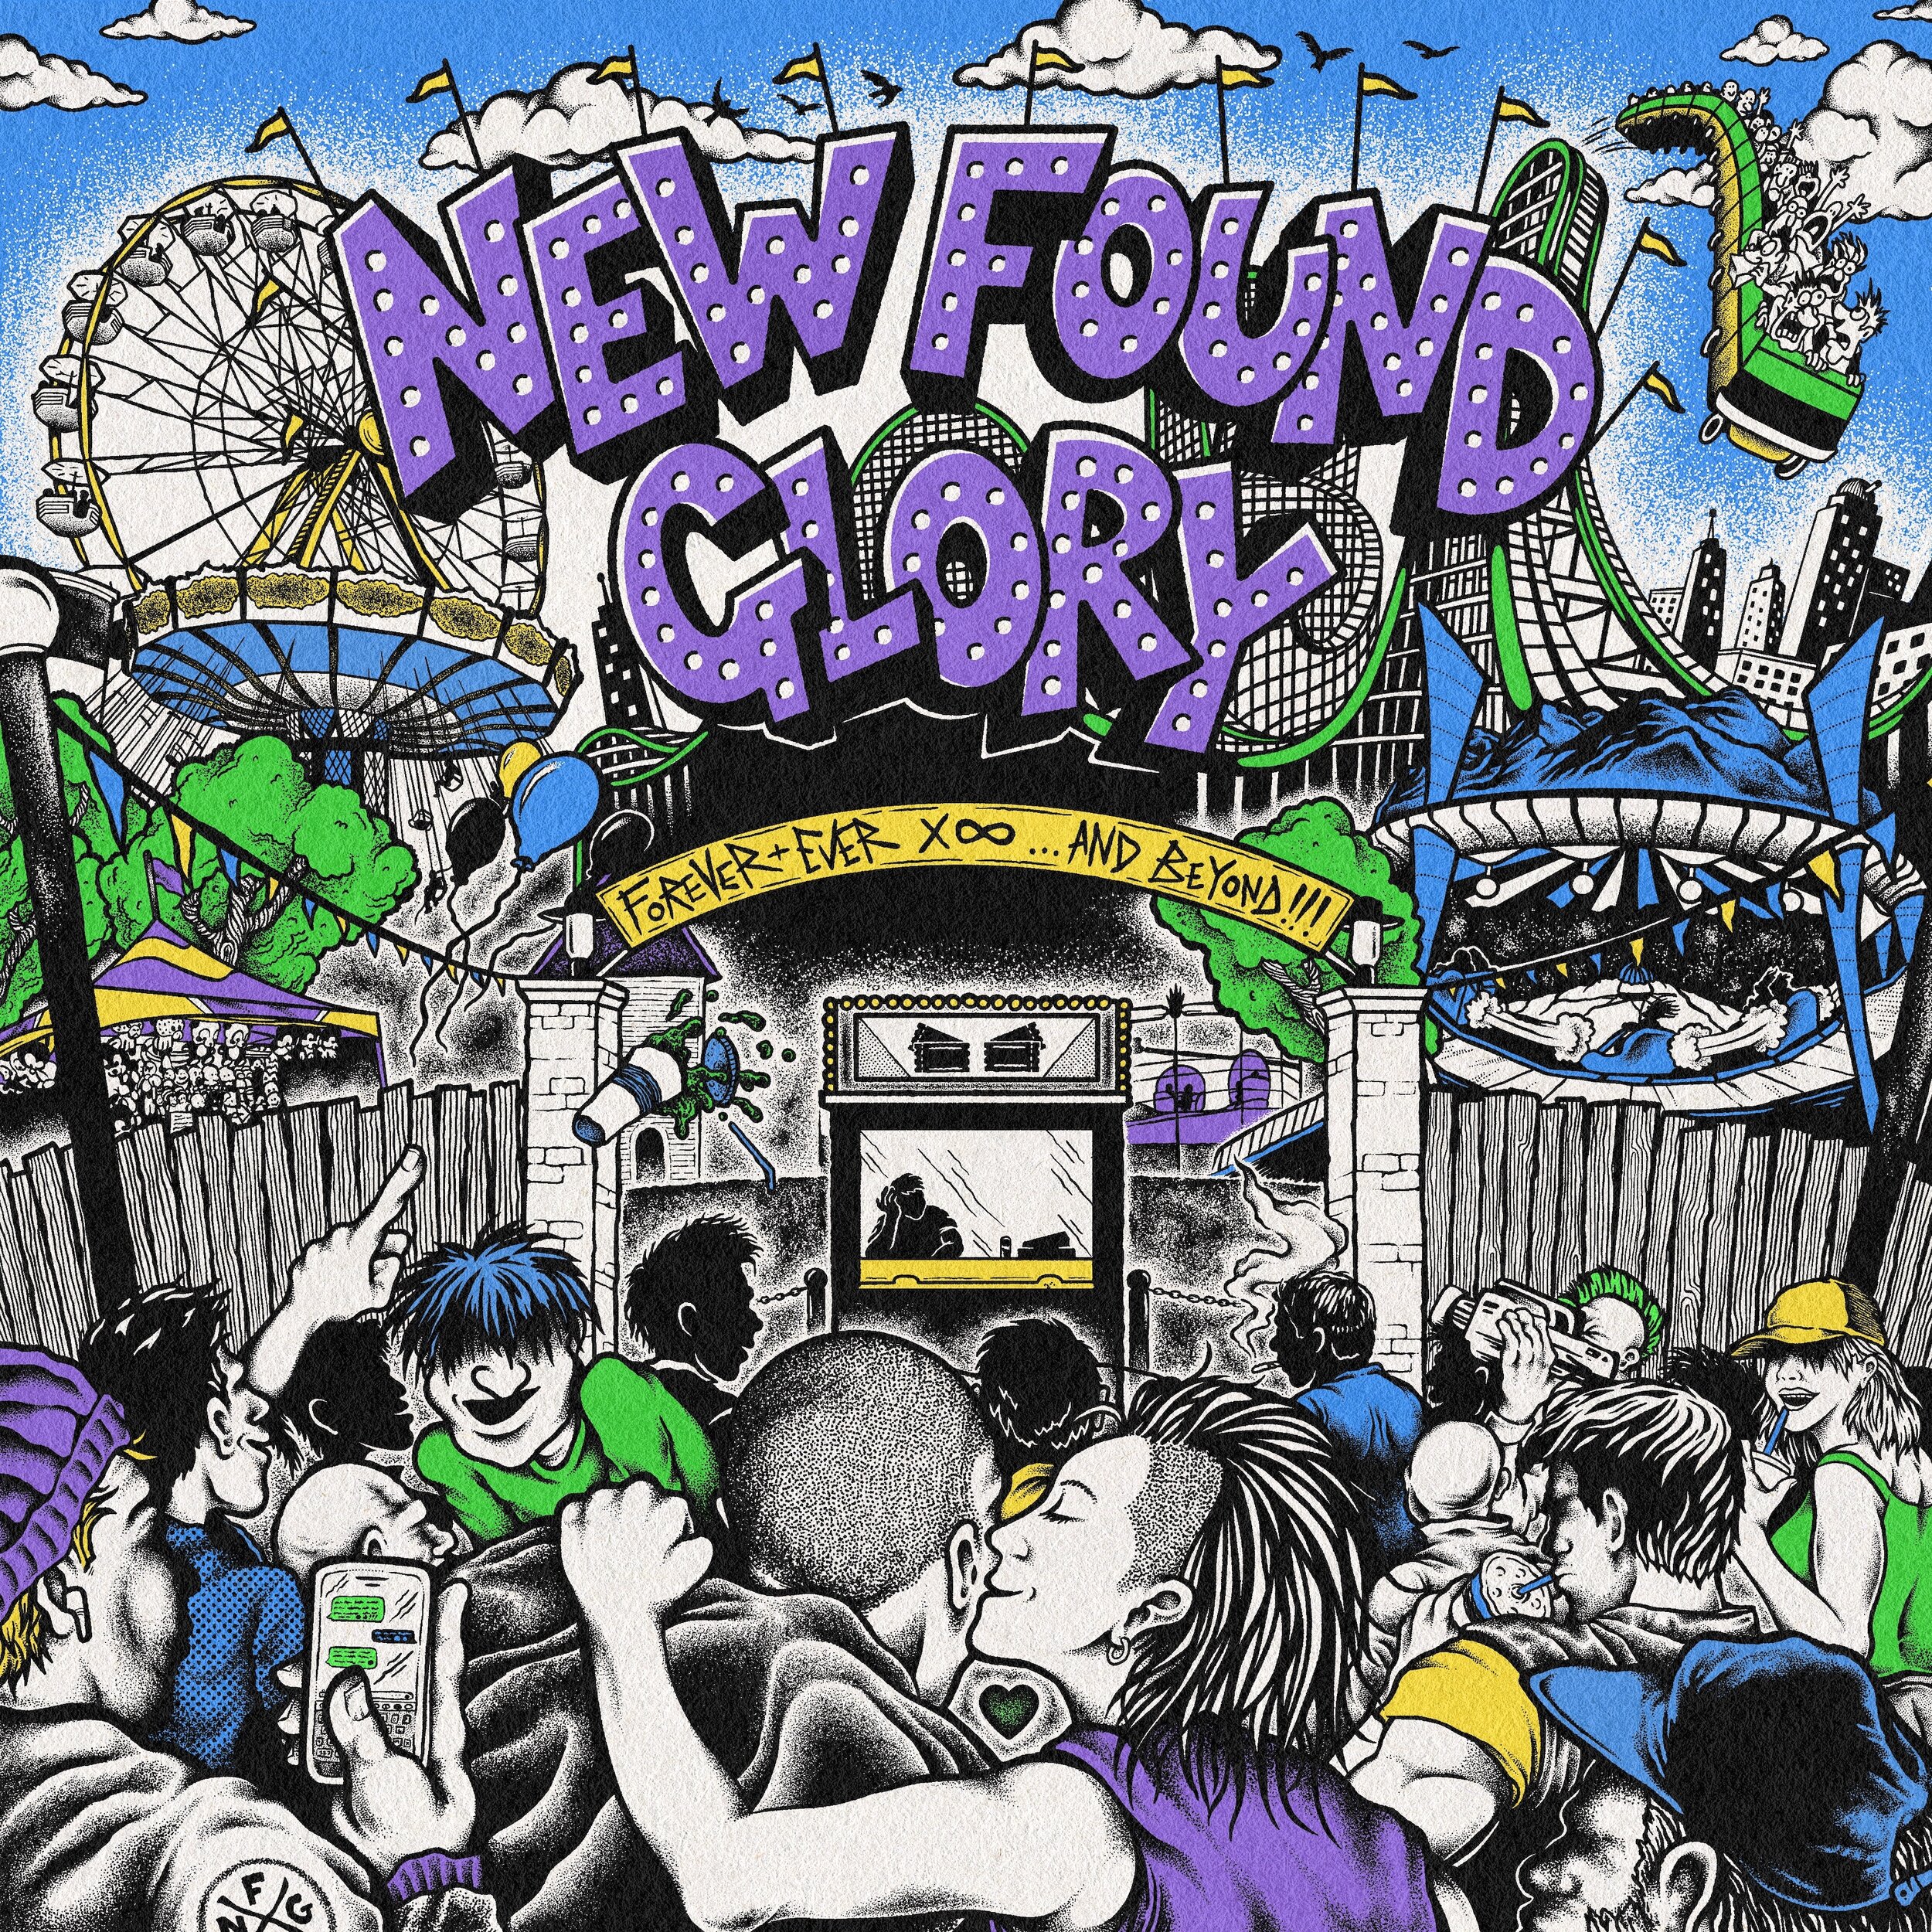 New Found Glory - Forever + Ever x Infinity... And Beyond!!!